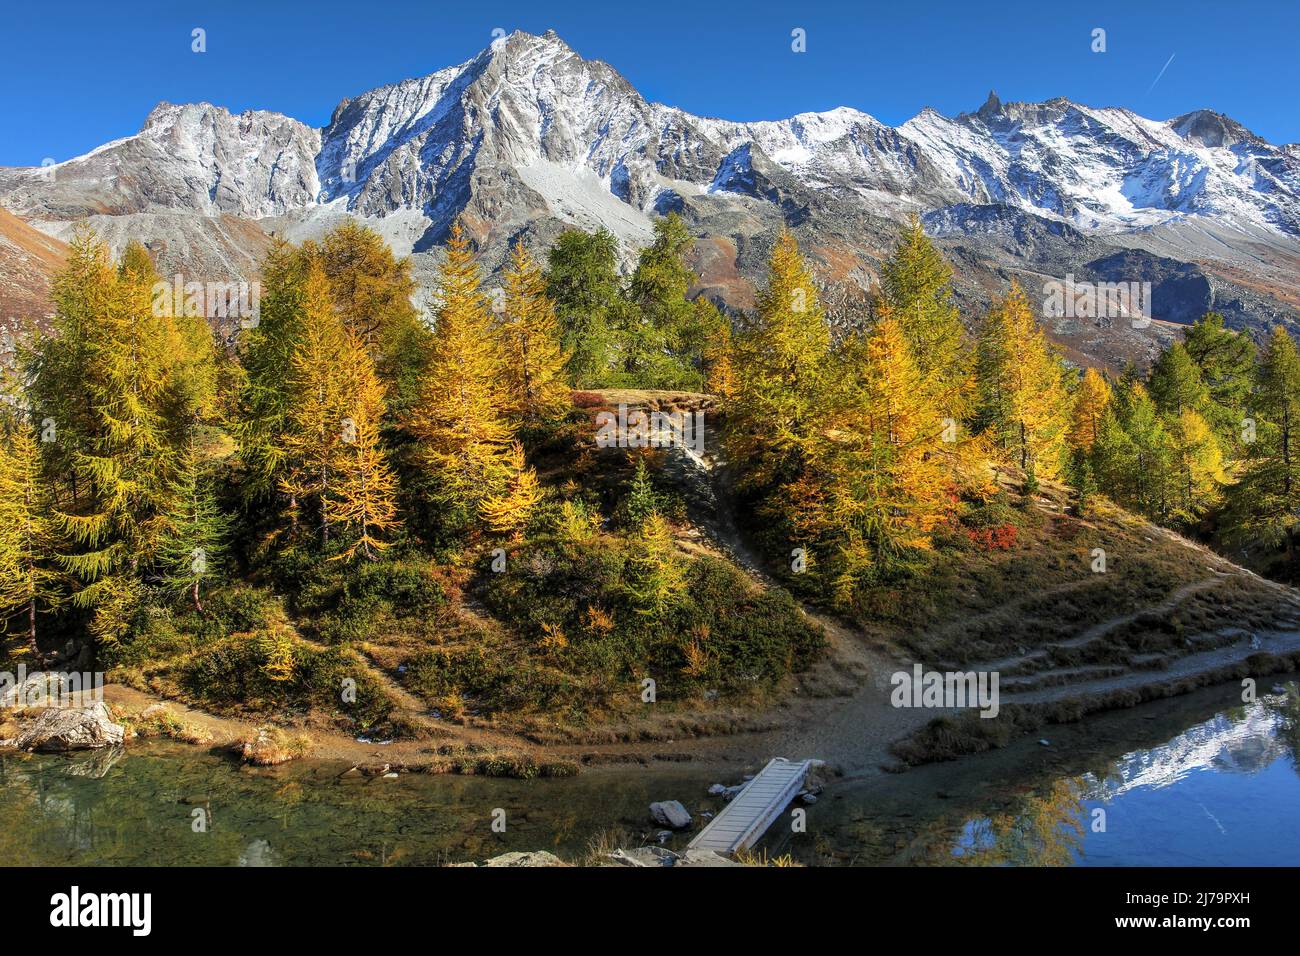 Dent du Perroc (3676m altitude) in Val d'Hérens near Sion in Valais (Wallis) canton of Switzerland as seen from the Lac Bleu in a beautiful autumn day Stock Photo